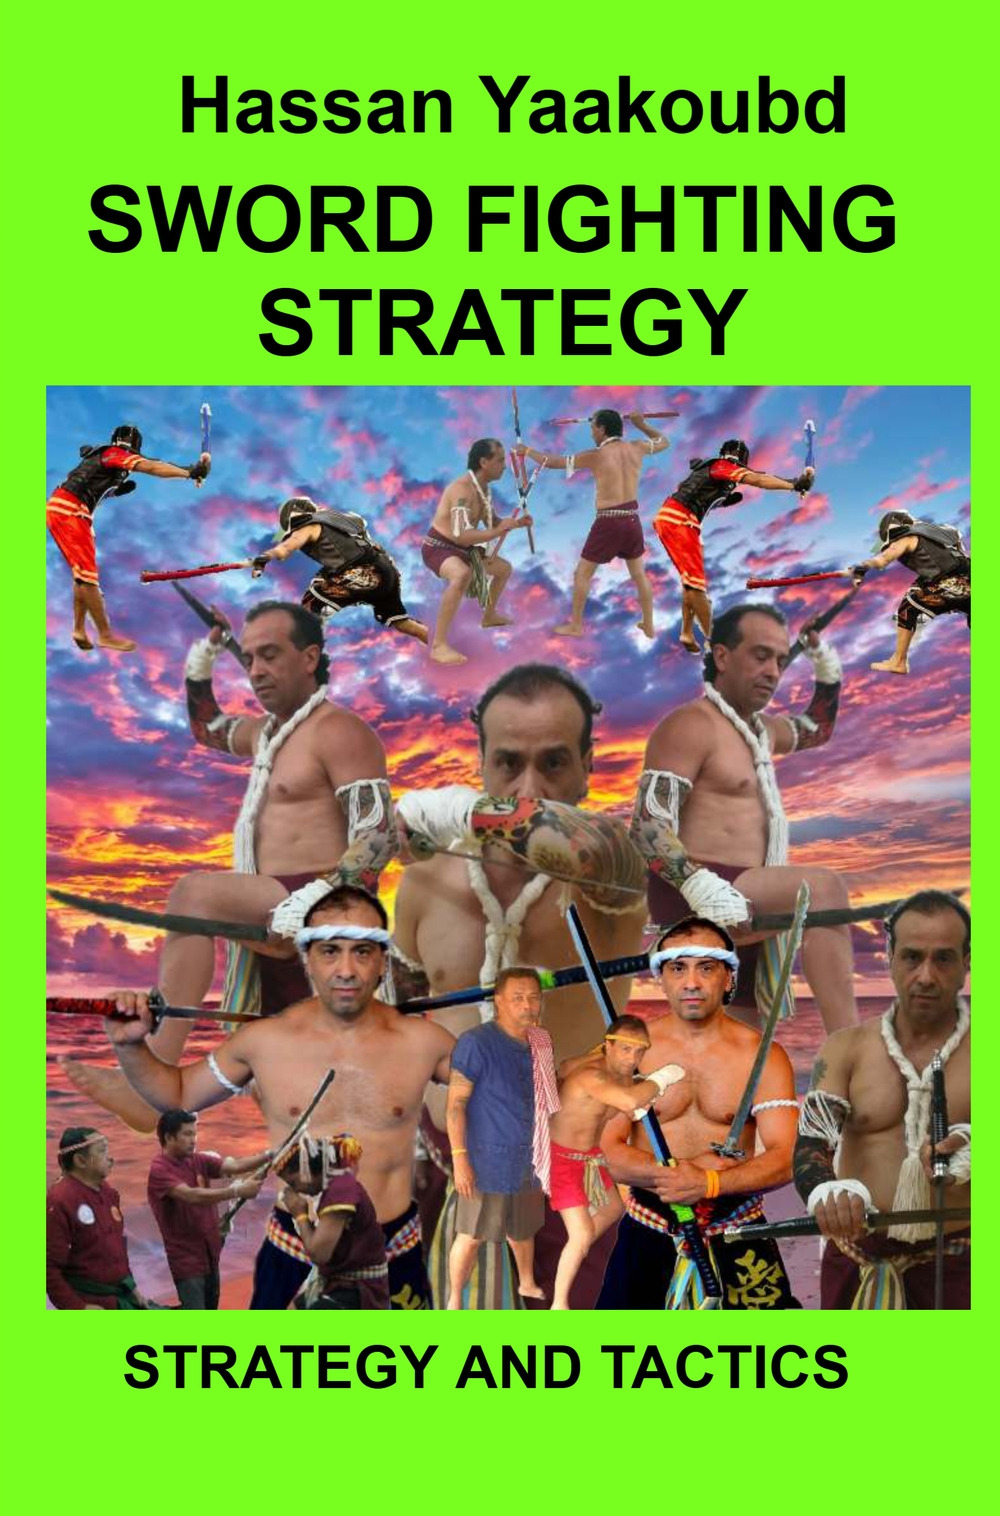 Sword fighting strategy. Strategy and tactics